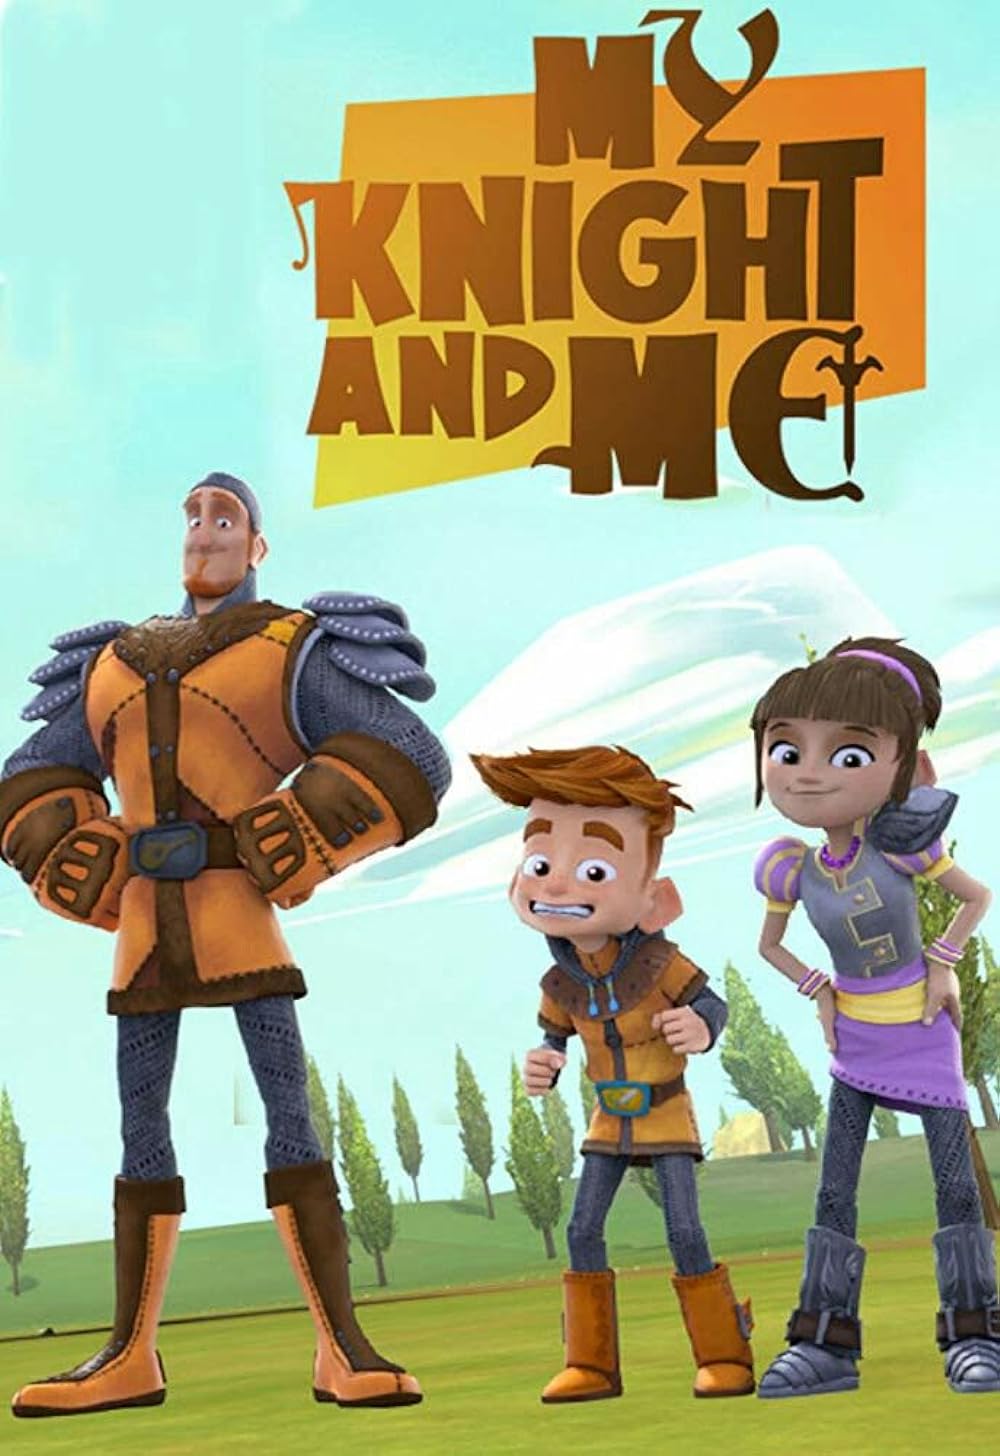 My Knight and Me